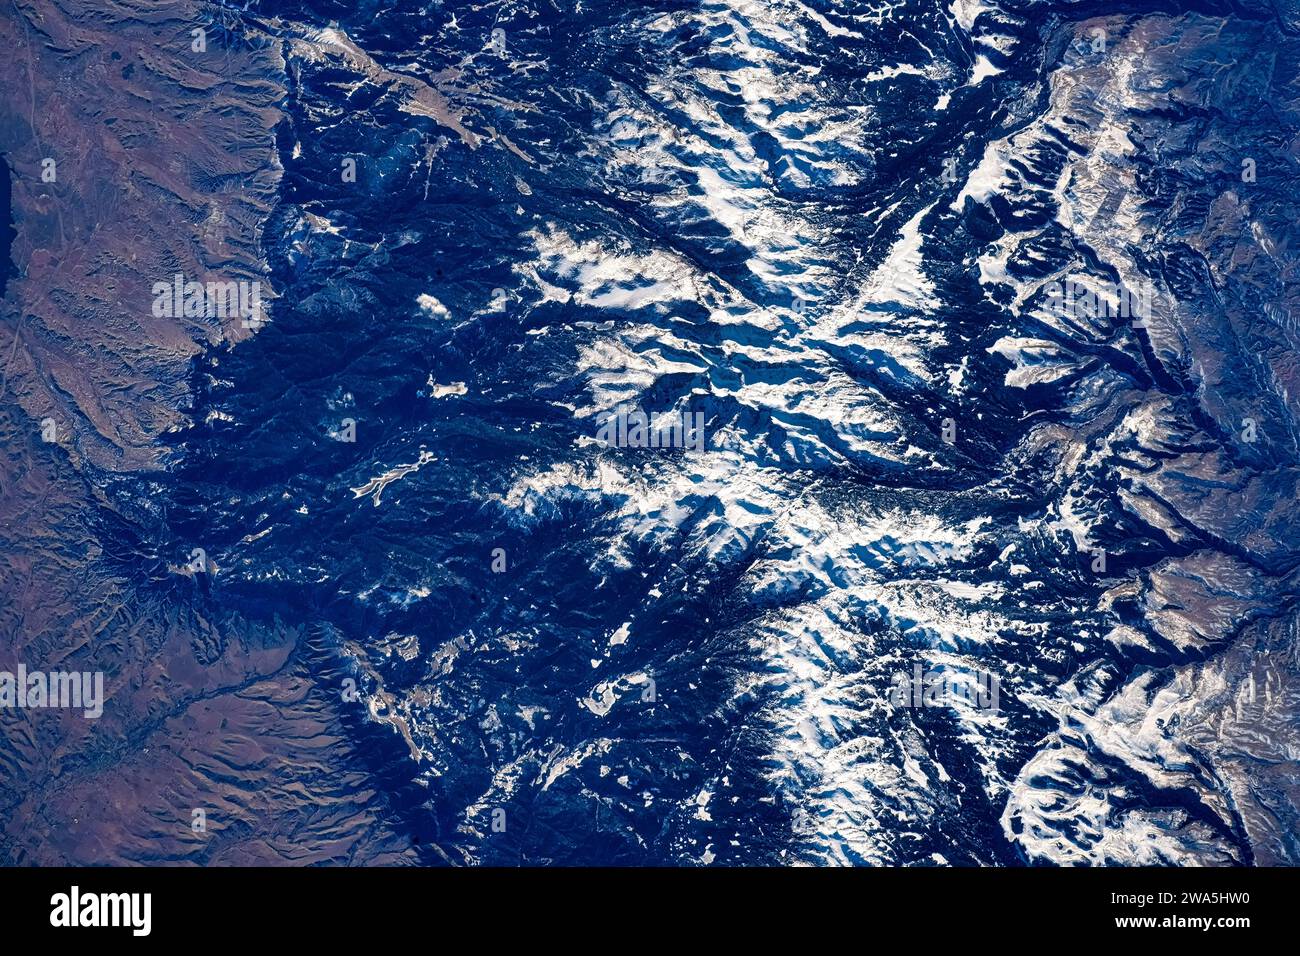 Observations of Planet Earth from Space. Digital enhancement of an image by NASA. Stock Photo